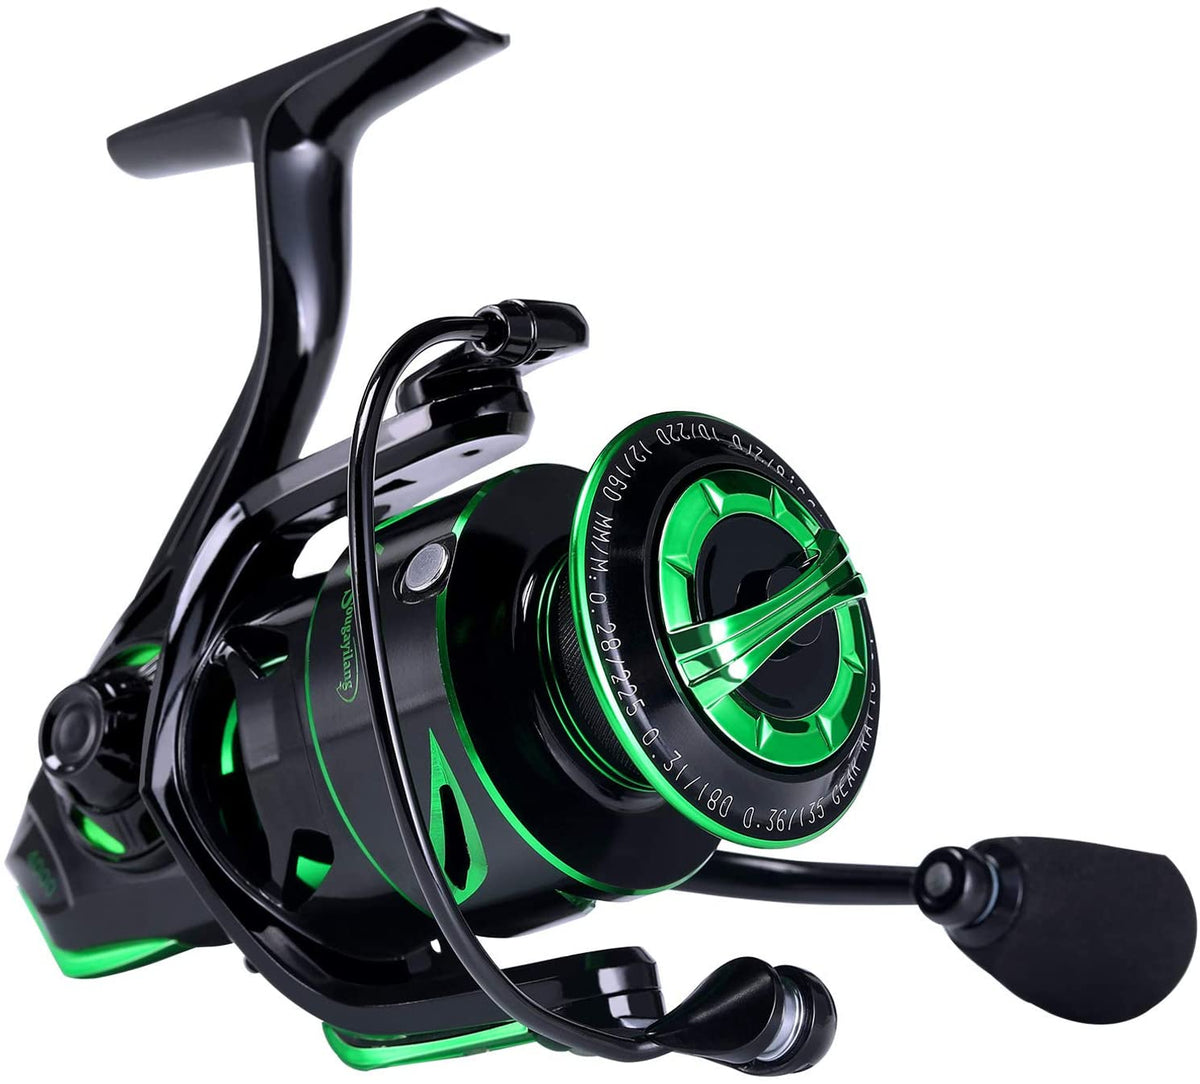 Sougayilang Spinning Reels Light Weight Ultra Smooth Powerful Fishing  Reels-Golden-4000 : : Sports, Fitness & Outdoors